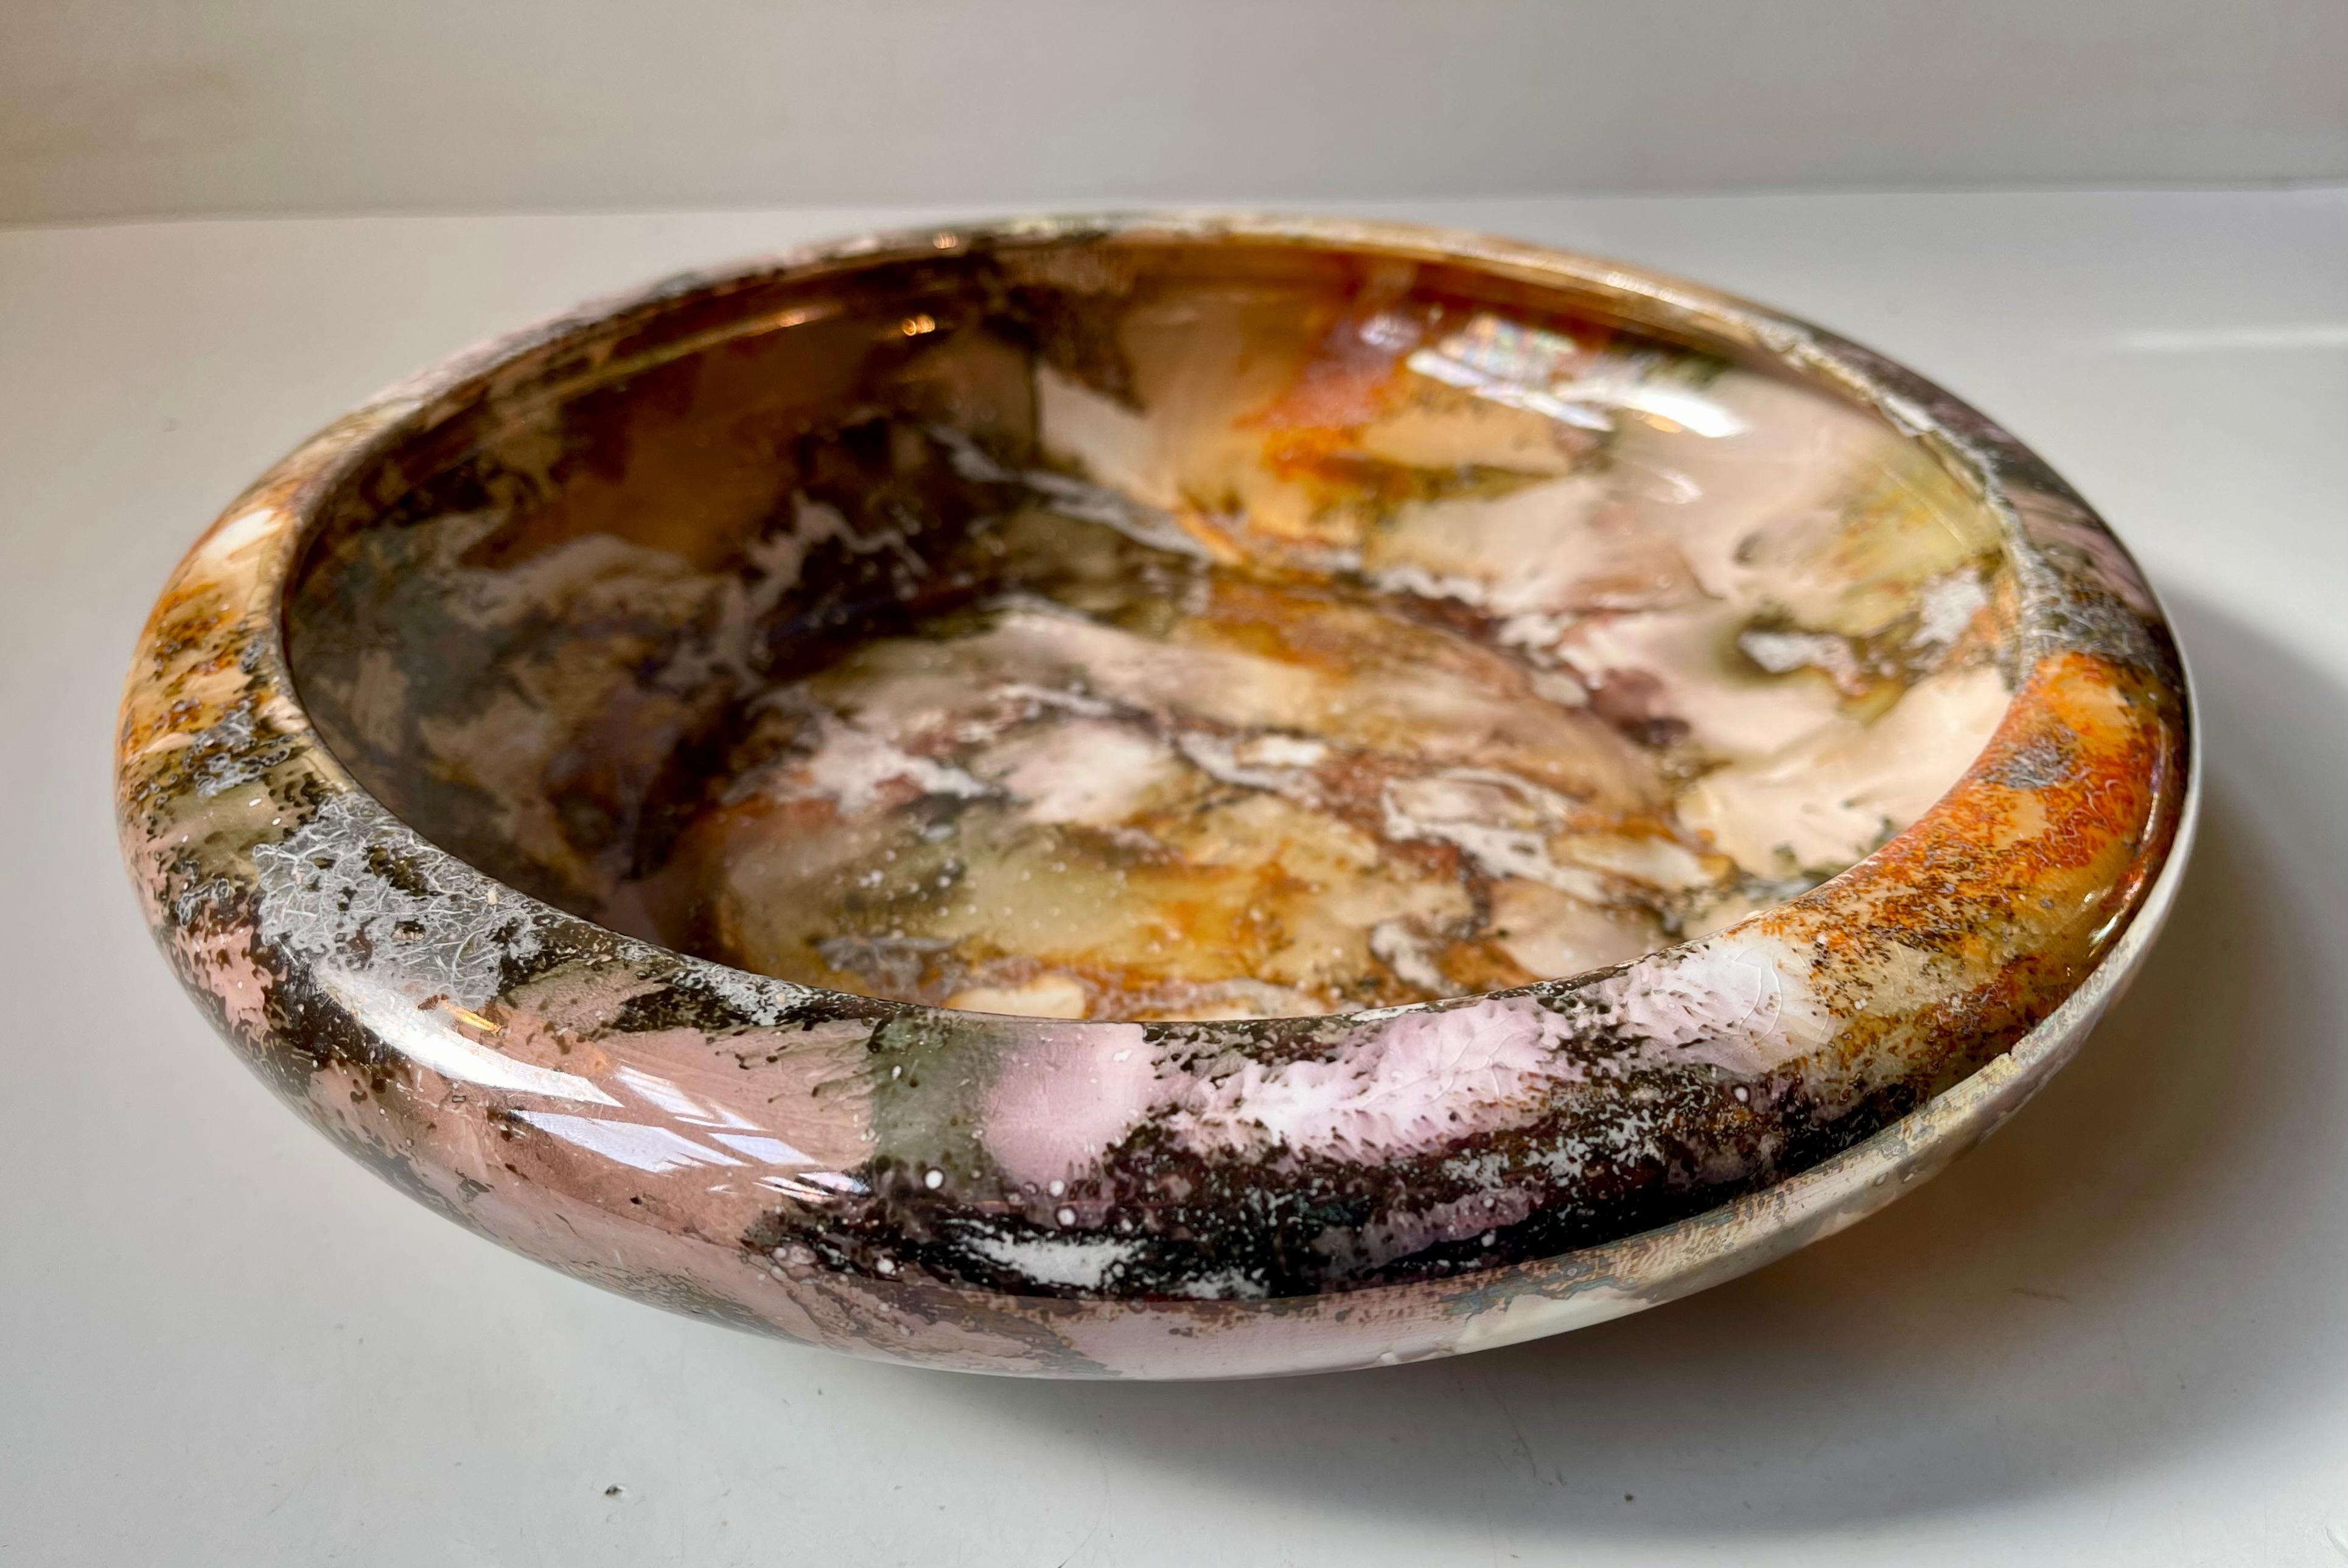 Finnish Art Deco Marble Glaze Faience Bowl by Arabia Finland, 1920s For Sale